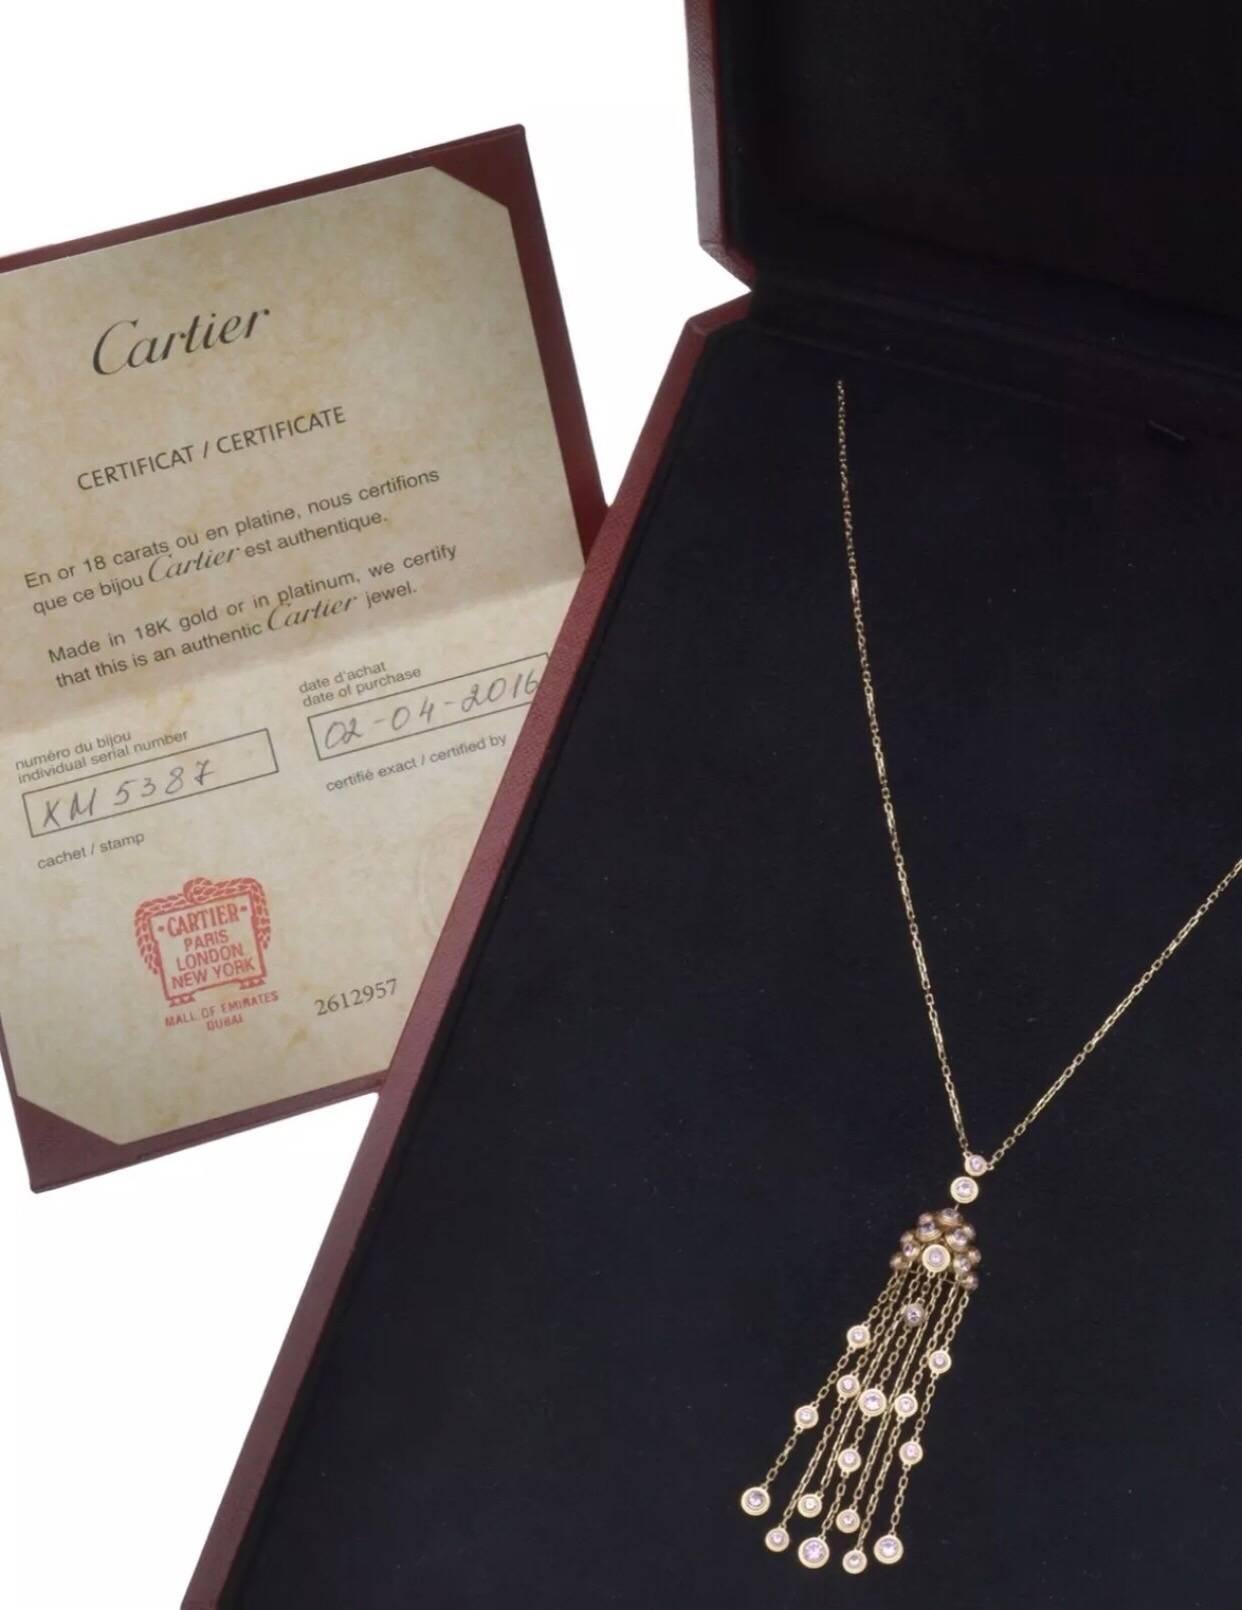 A Cartier necklace from the ‘Legers’ collection set in 18k rose gold. The necklace features thirty brilliant-cut pink sapphires of approx 1.24 carats set to a plain rose gold necklace of approx 22 inches

The necklace is sold with the original case,